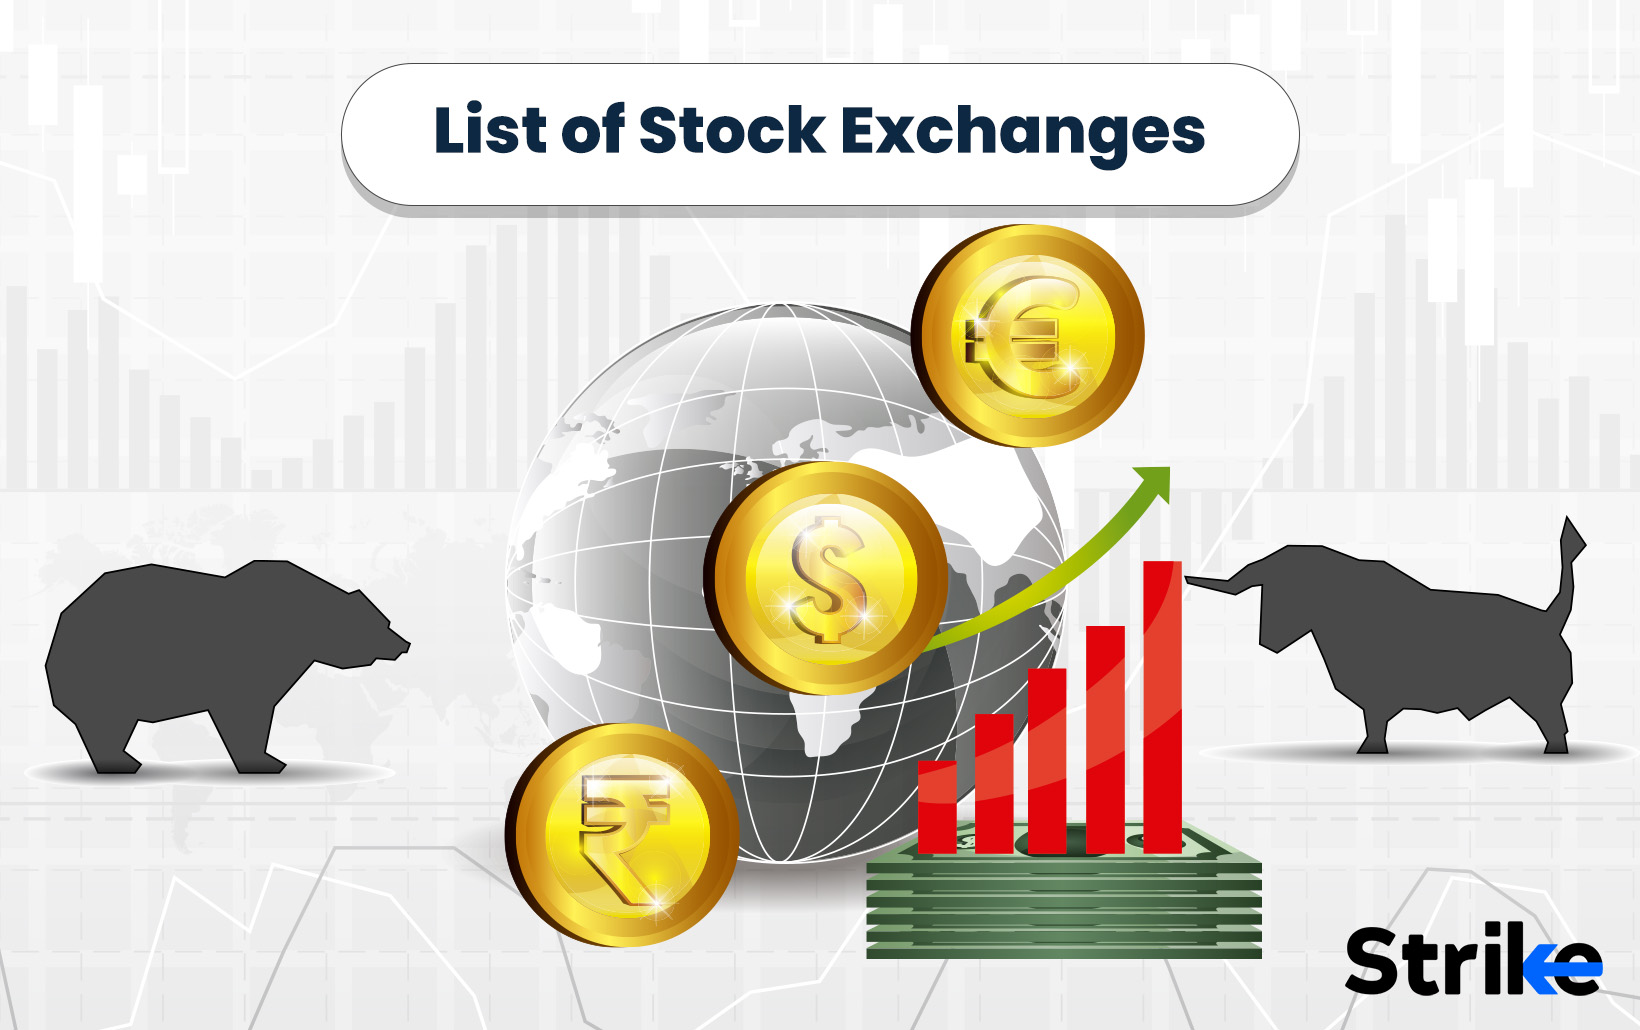 List of stock exchanges: Major stock exchanges and stock exchanges by continent